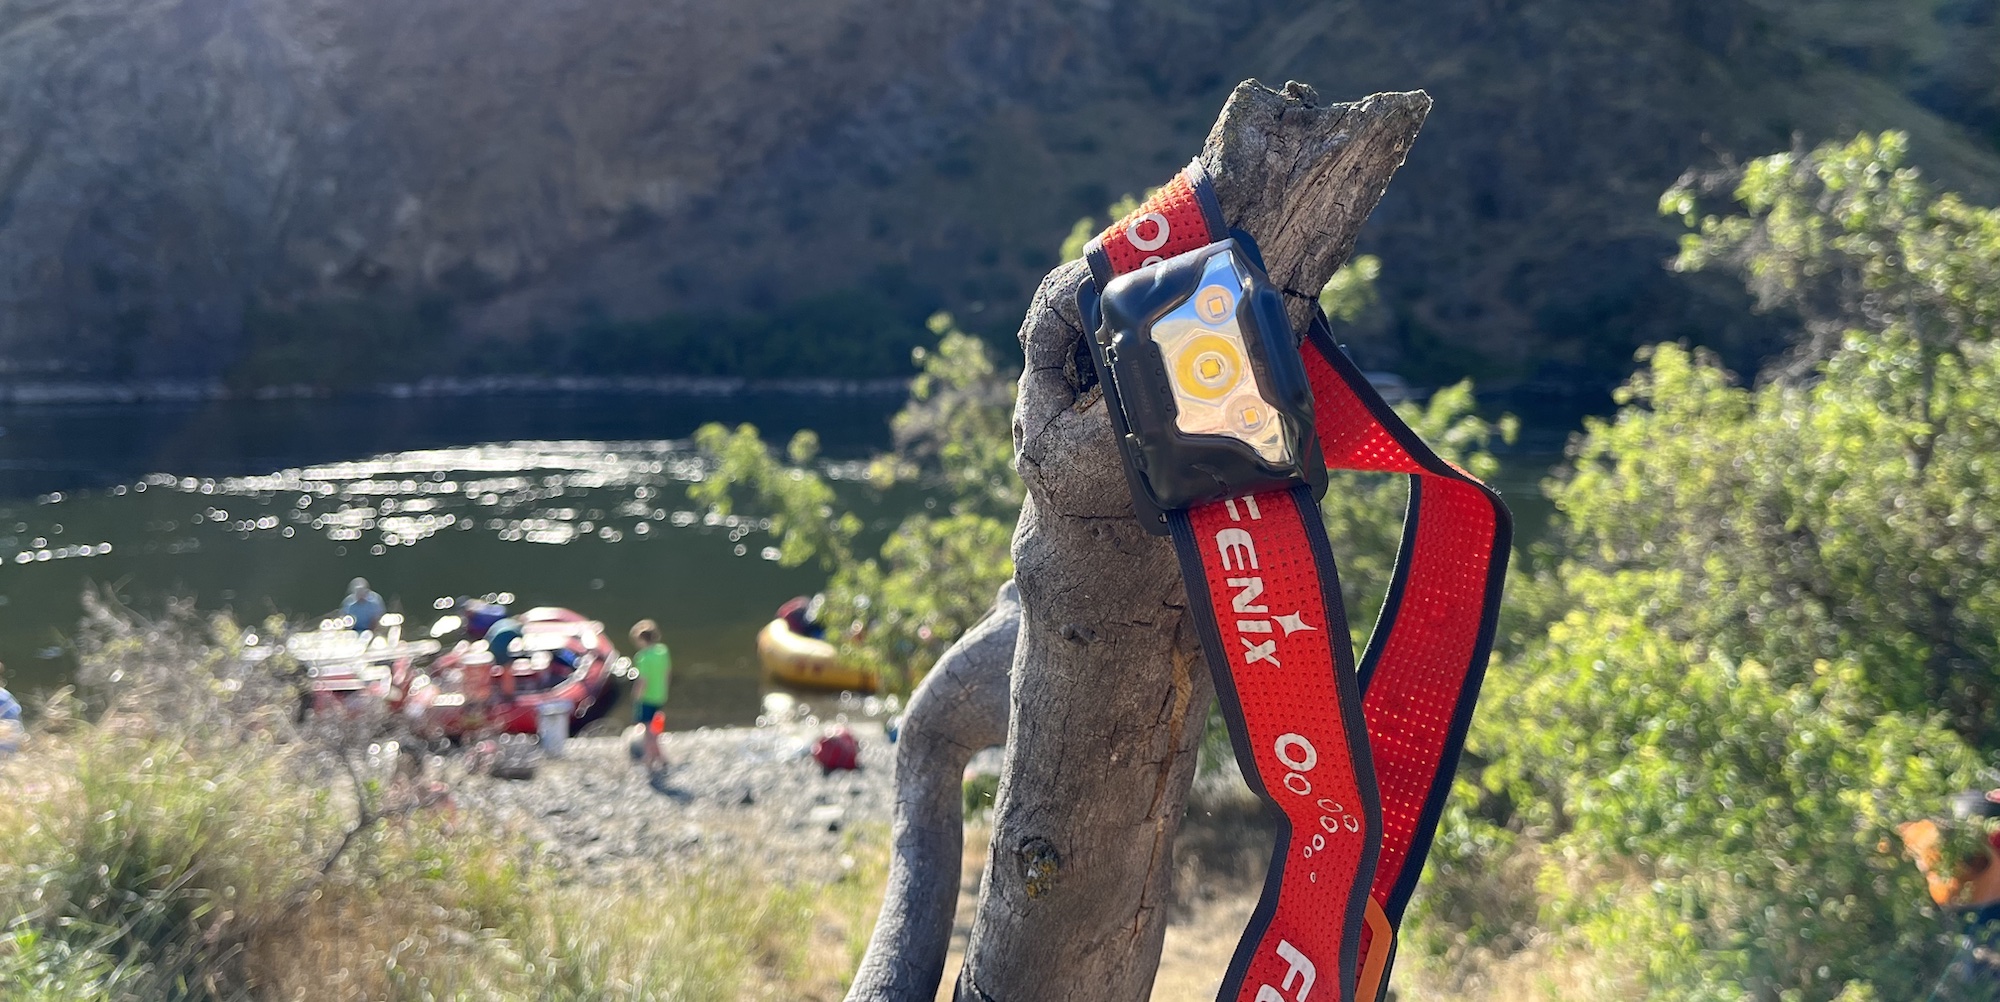 A red and black headlamp hanging from a tree branch with the Snake River and red rafts blurred in the background